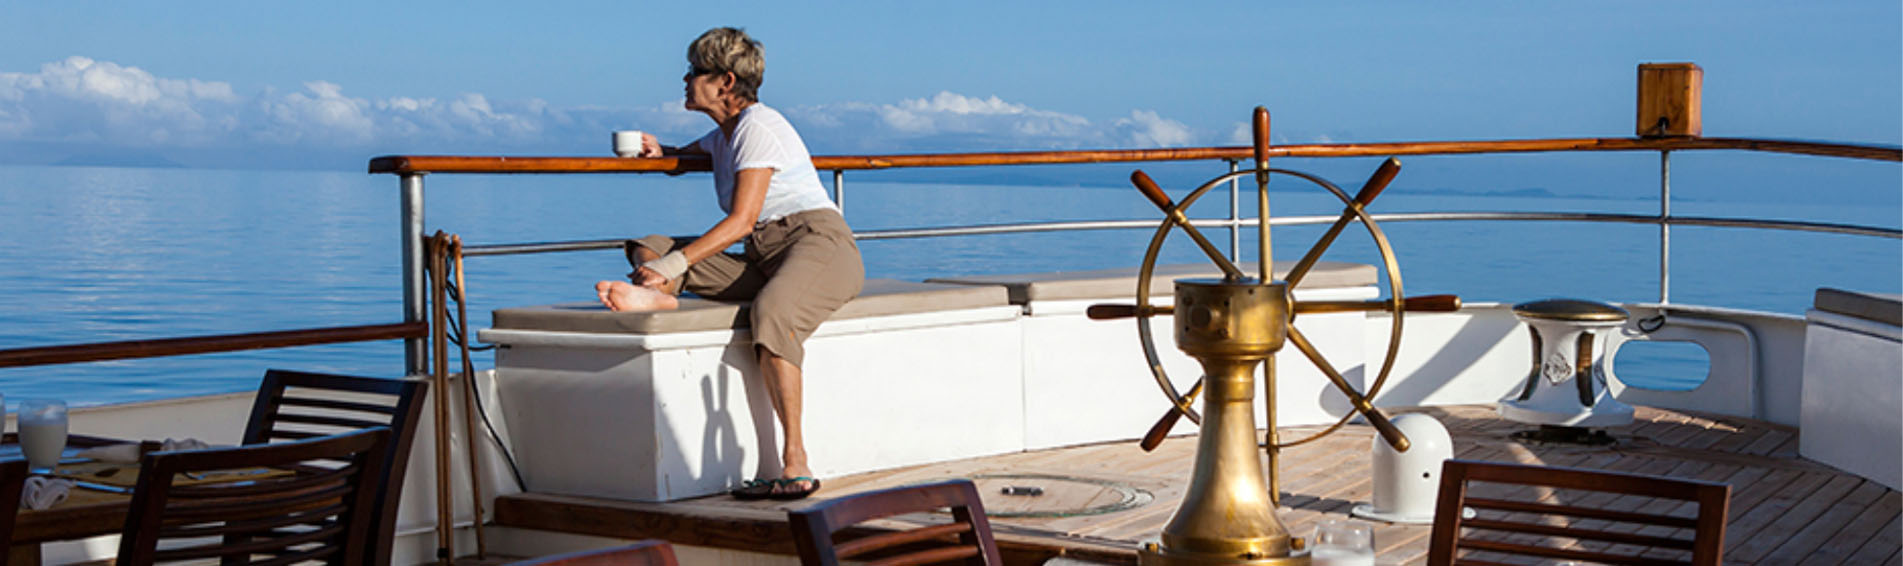 GRACE onboard services Galapagos